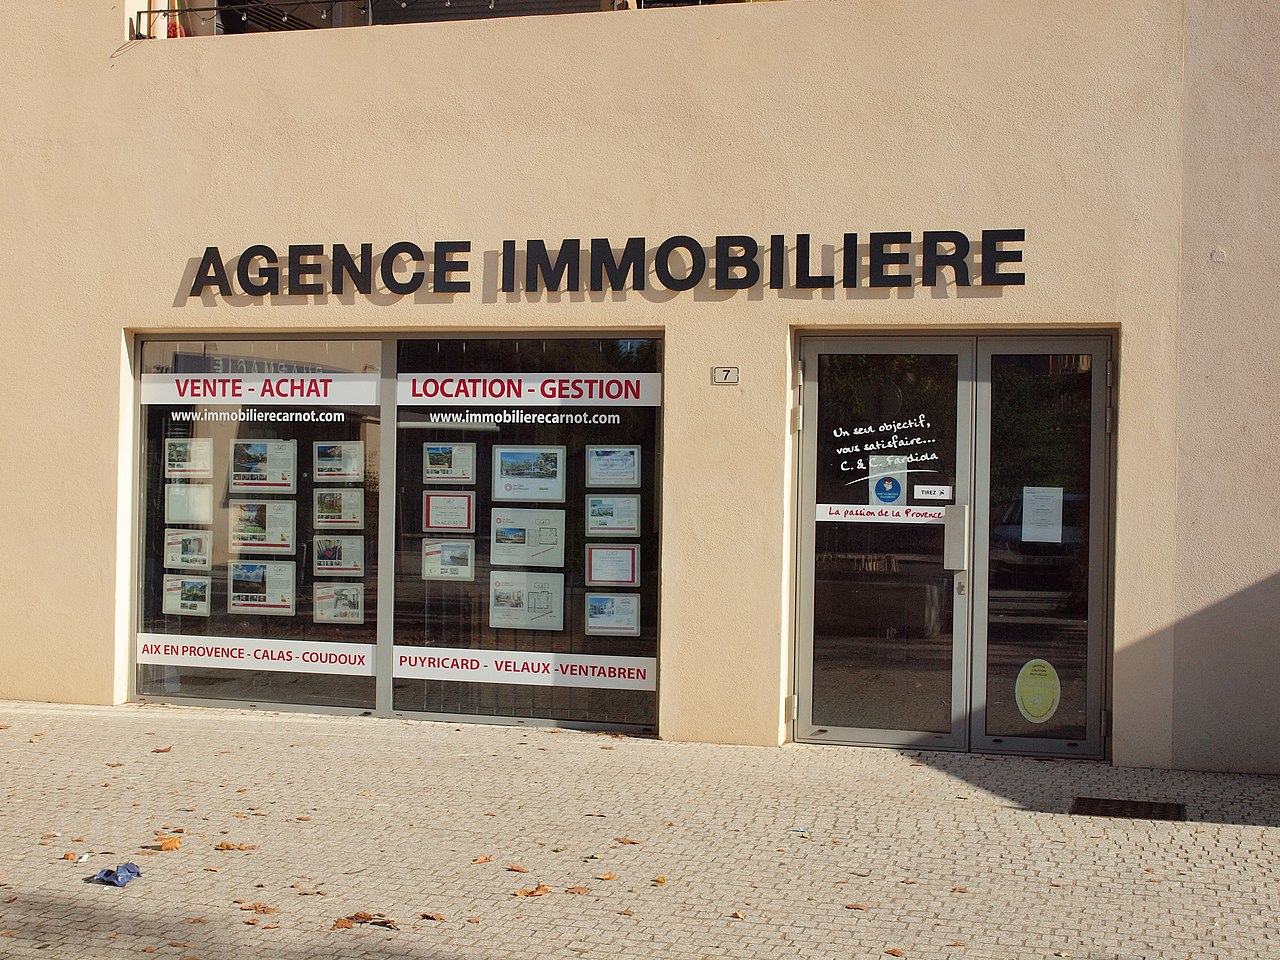 Agence immobilière ©Wikimedia Commons